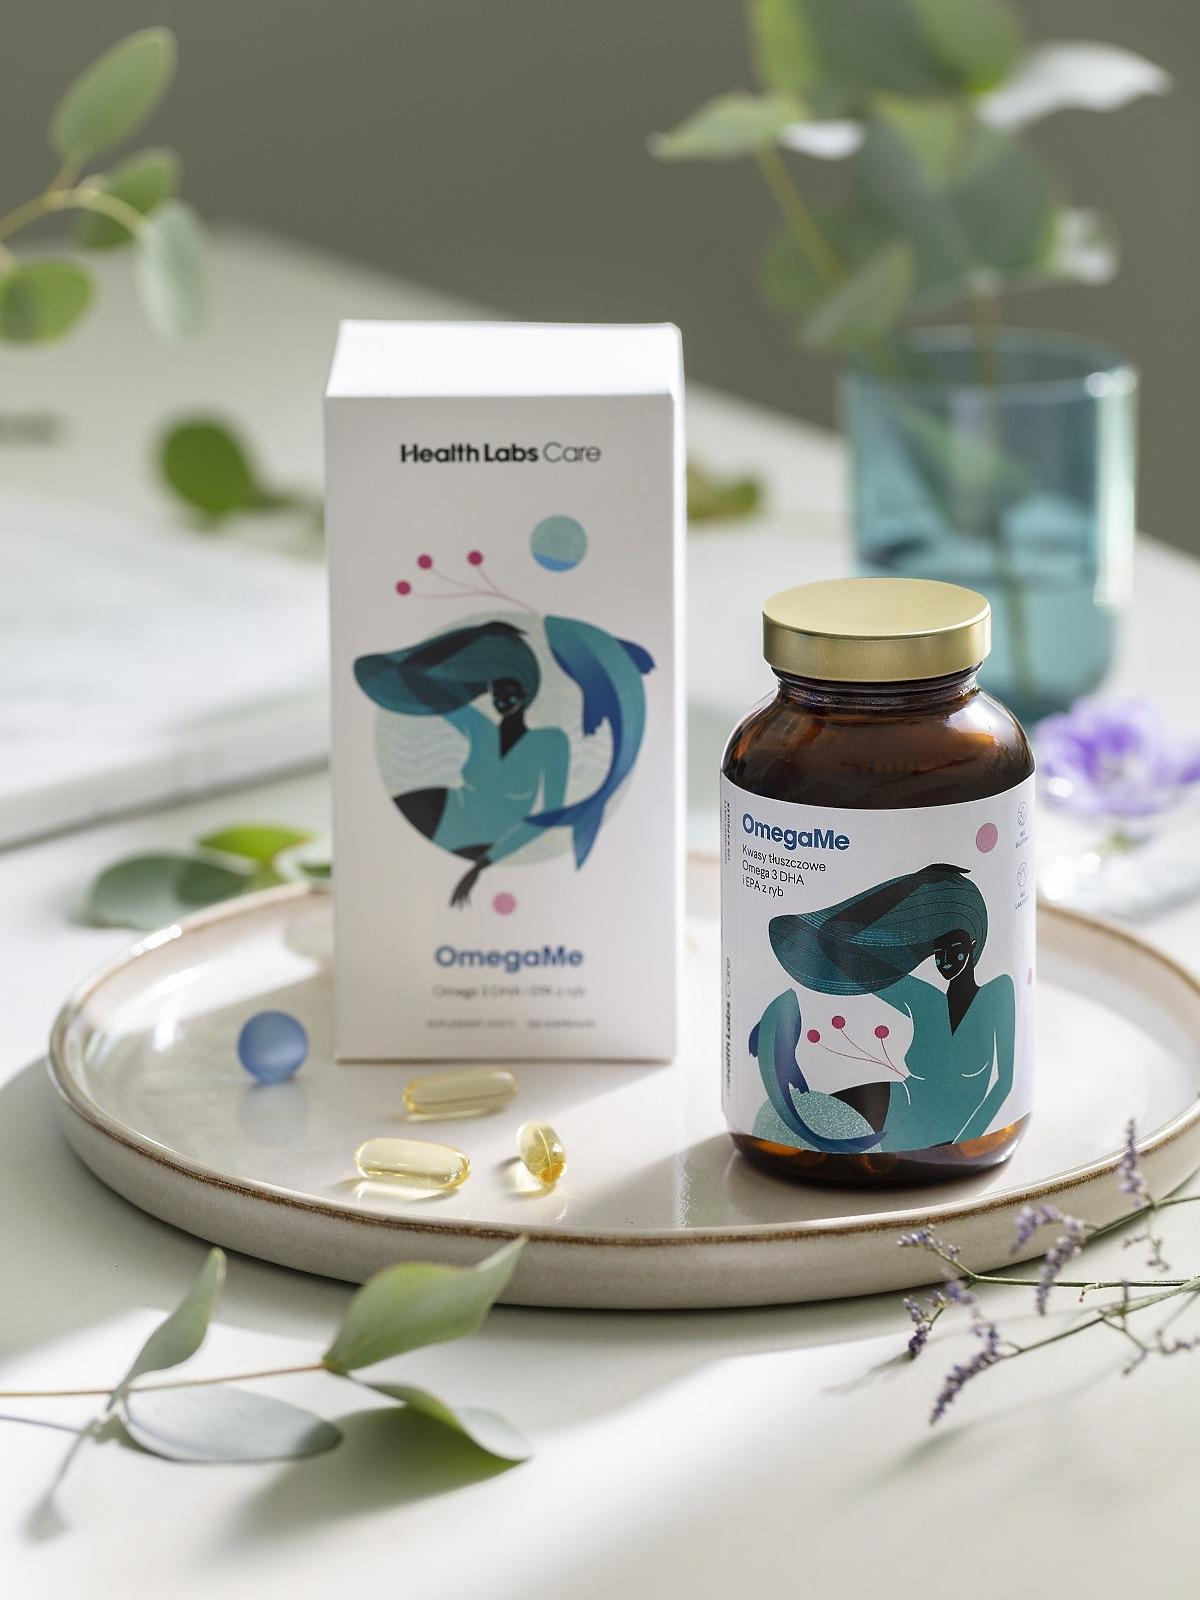 OmegaMe Health Labs Care